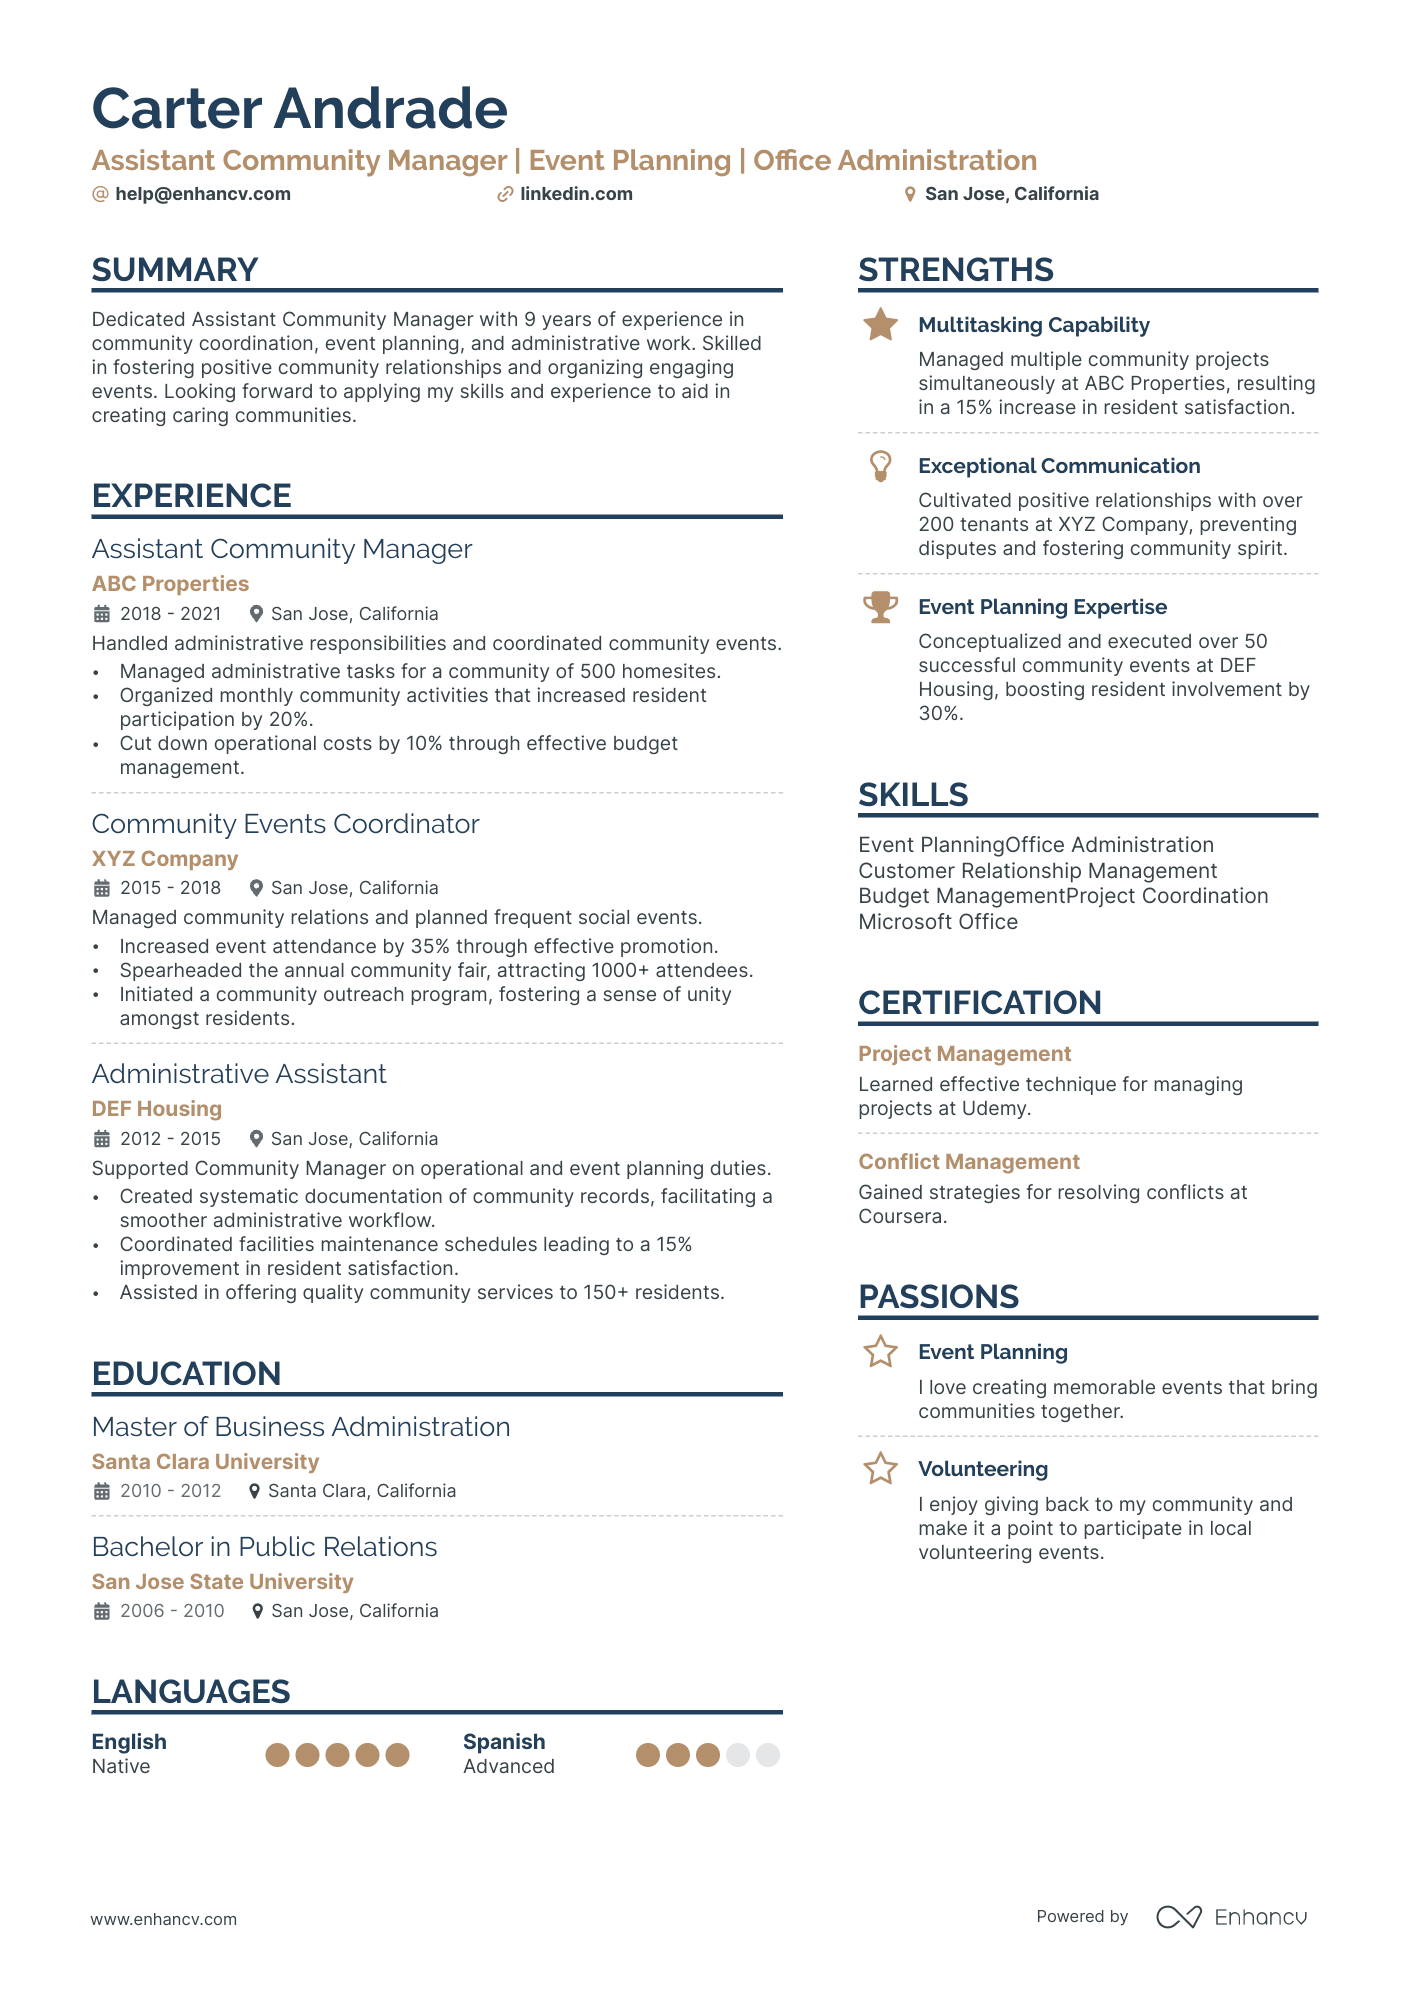 Assistant Community Manager resume example